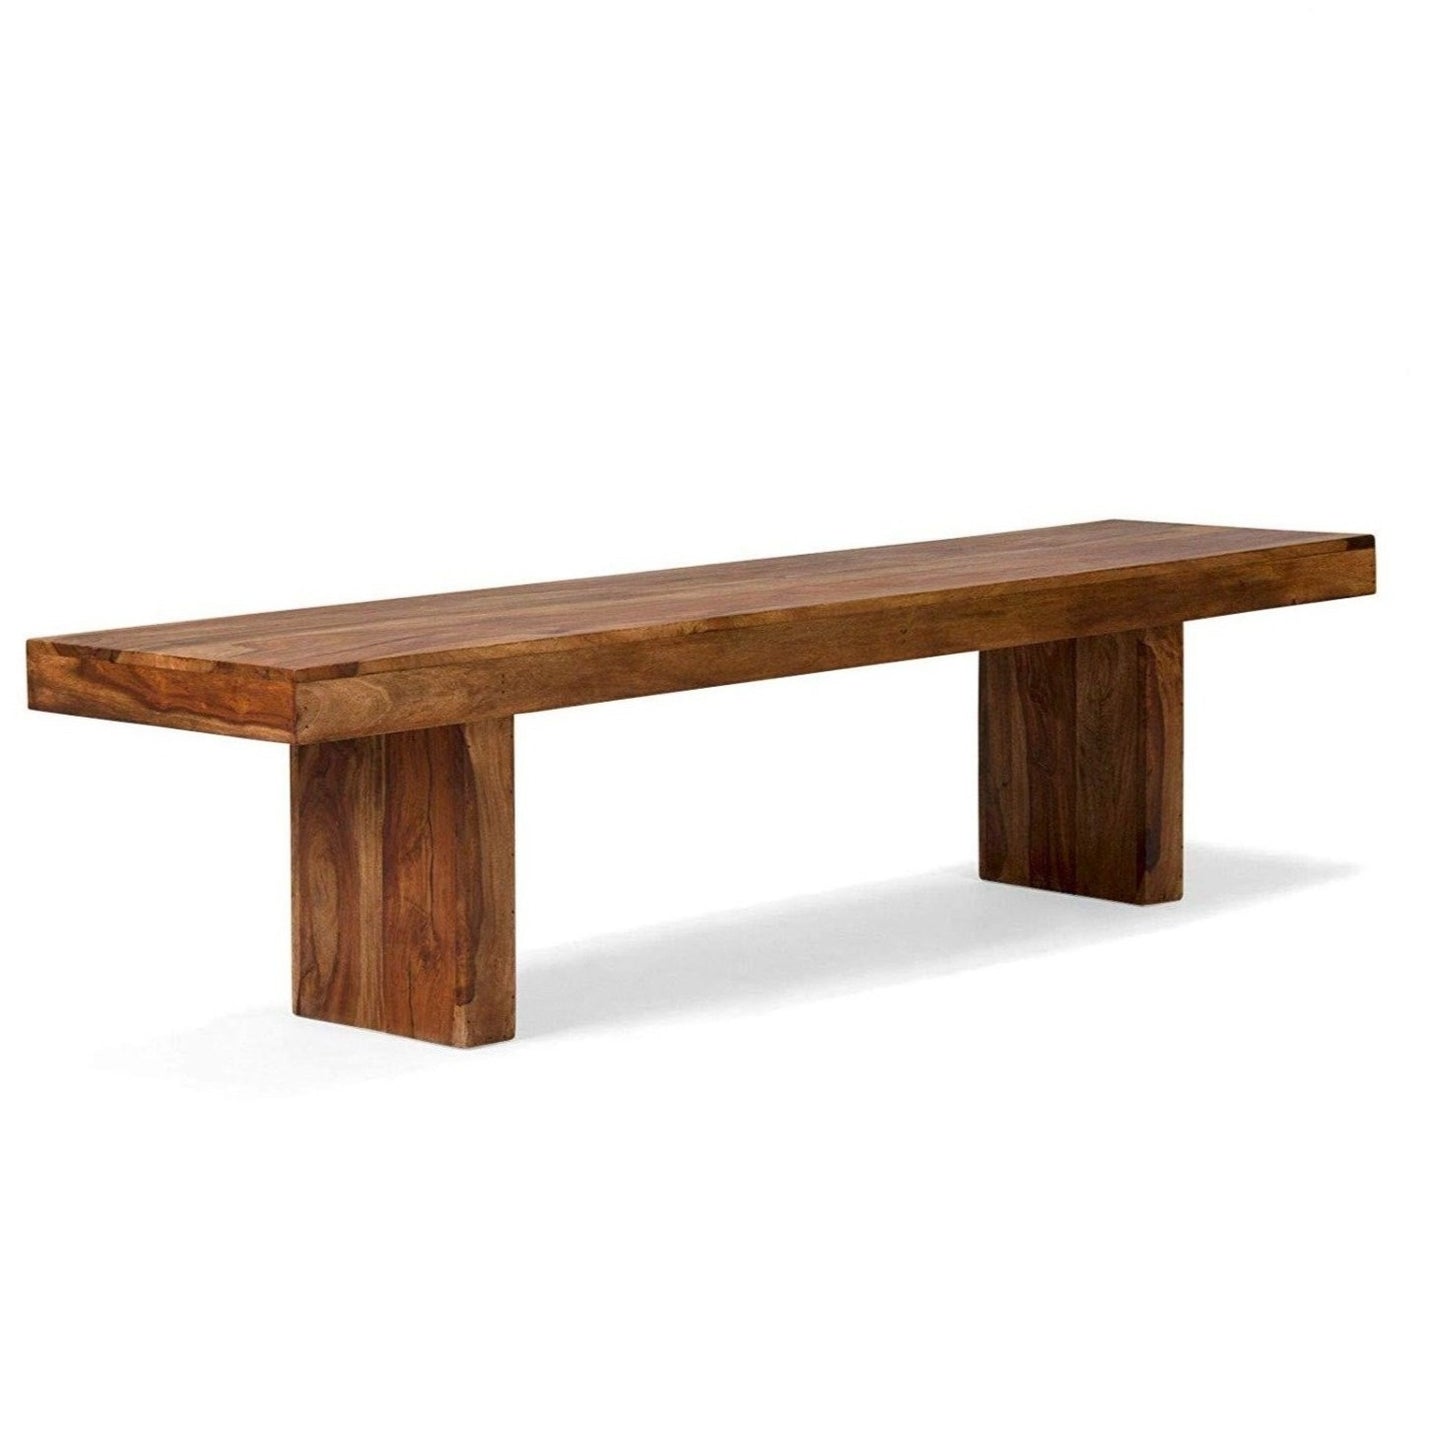 Bench made of solid sheesham wood